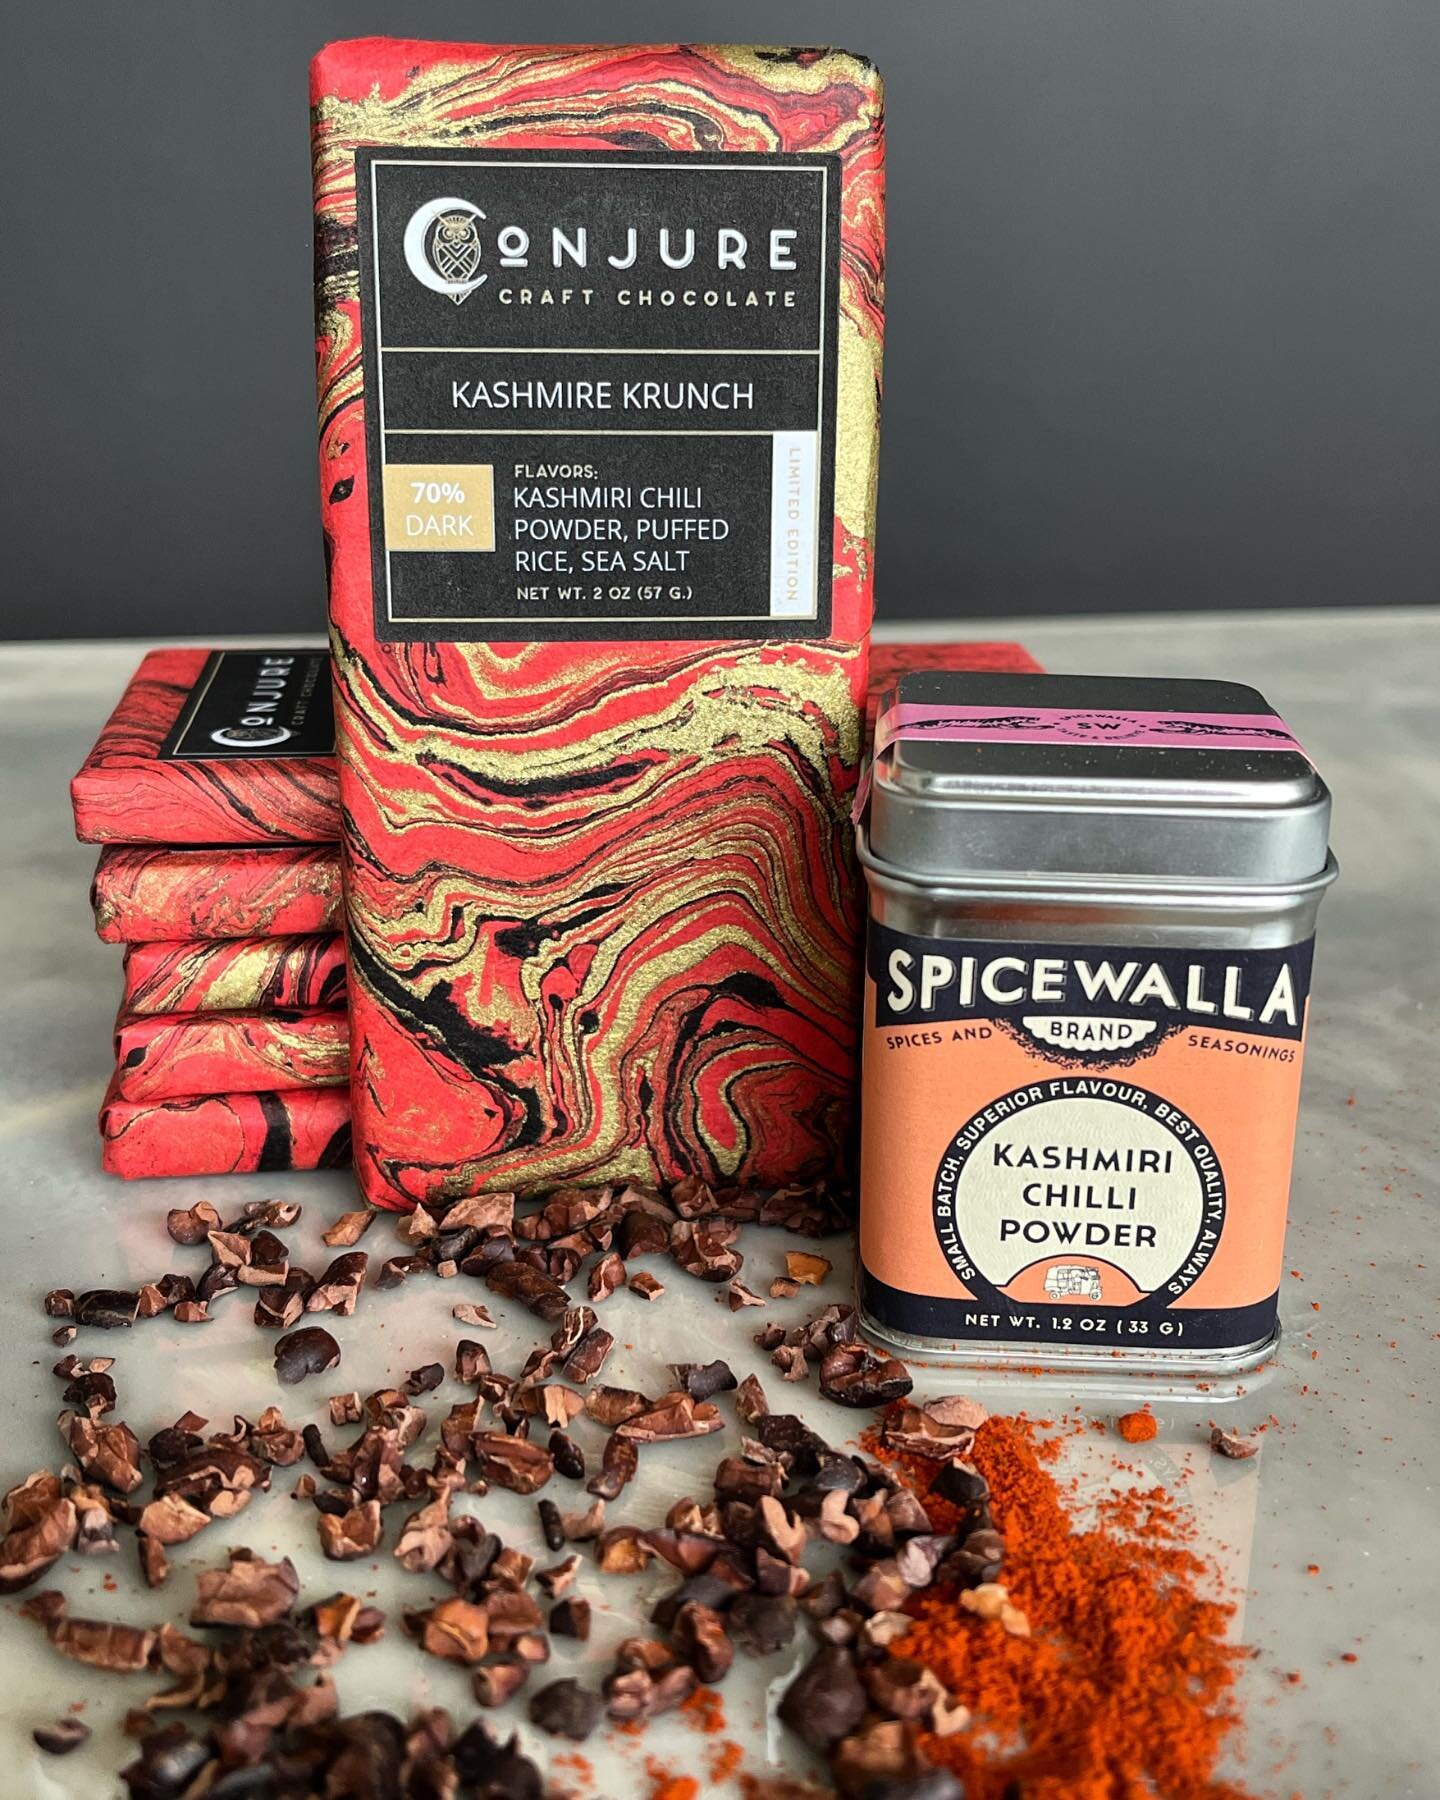 We&rsquo;re excited for this one!! In collaboration with @spicewalla we&rsquo;re bringing you Kashmire Krunch🌶️. A blend of organic cacao is mixed with Spicewalla&rsquo;s Kashmiri Chili Powder, puffed rice and just a smidge of sea salt. 🌶️
The choc